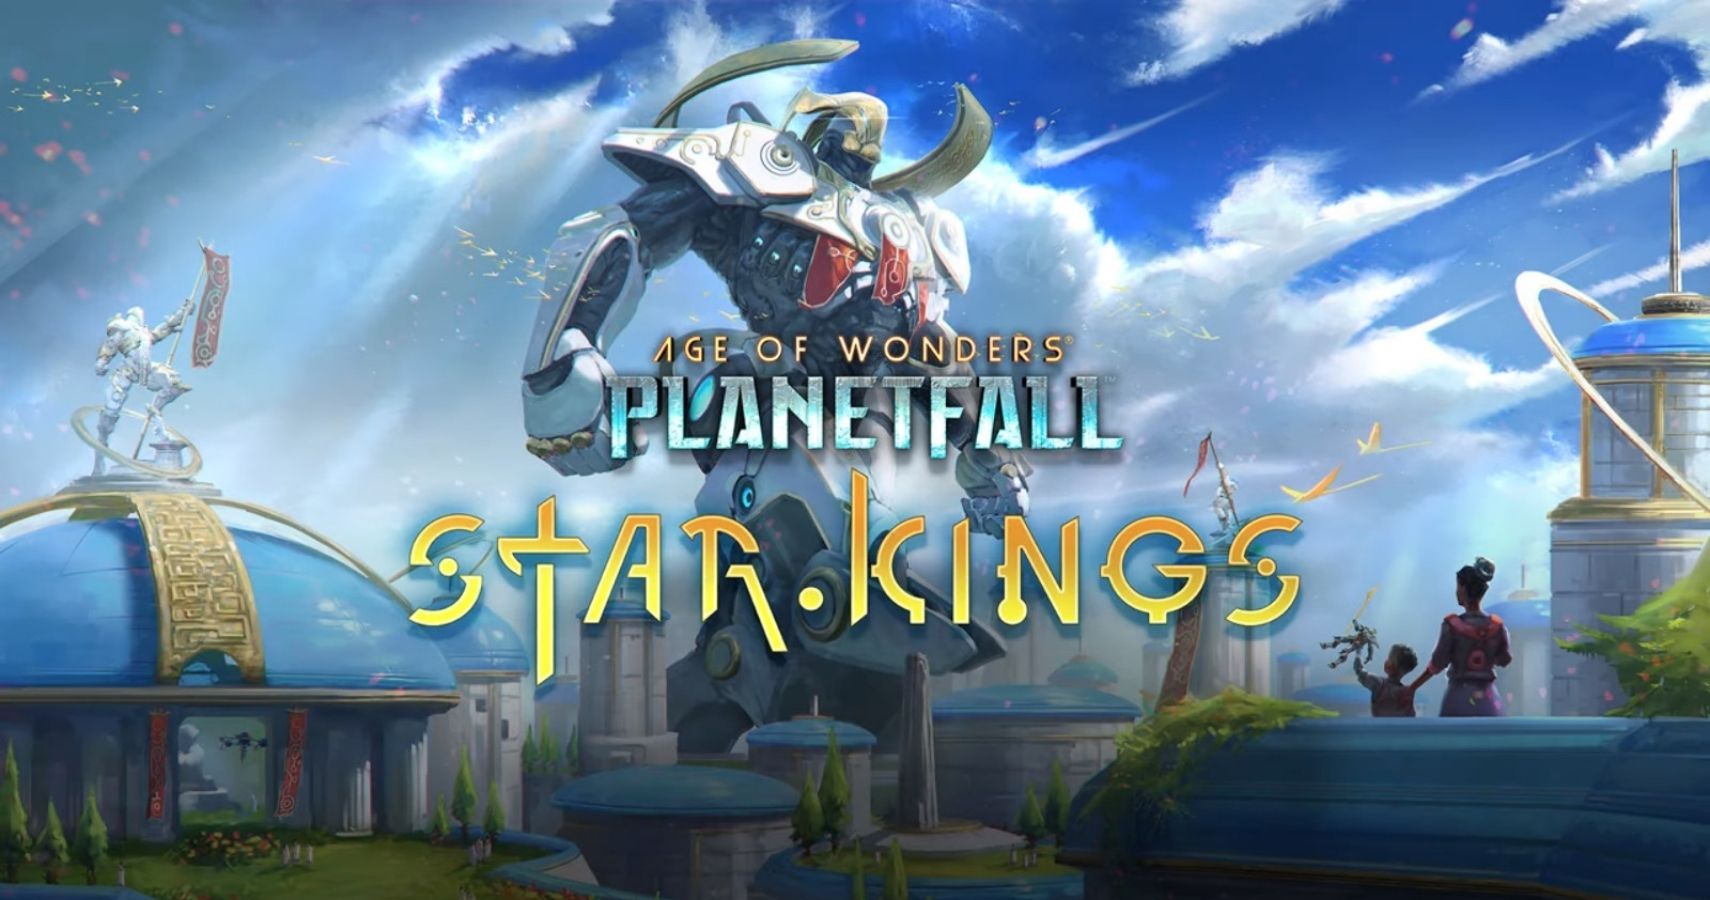 Age of Wonders Planetfall Star Kings Update feature image